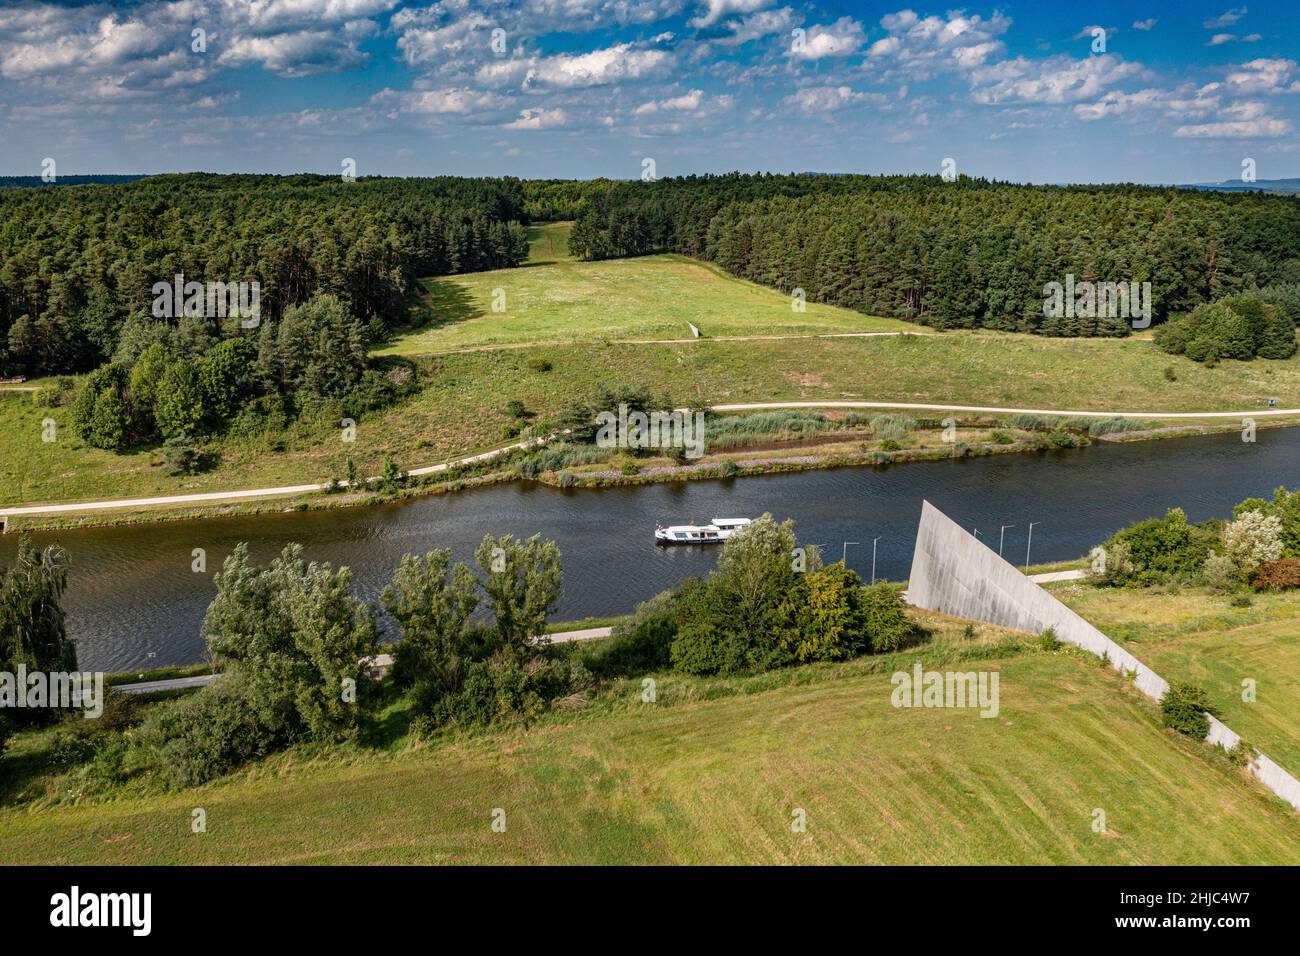 aerial view of the rhein-main-danube-canal with monument Scheitelhaltung in nature park altmühltal, bavaria, germany Stock Photo